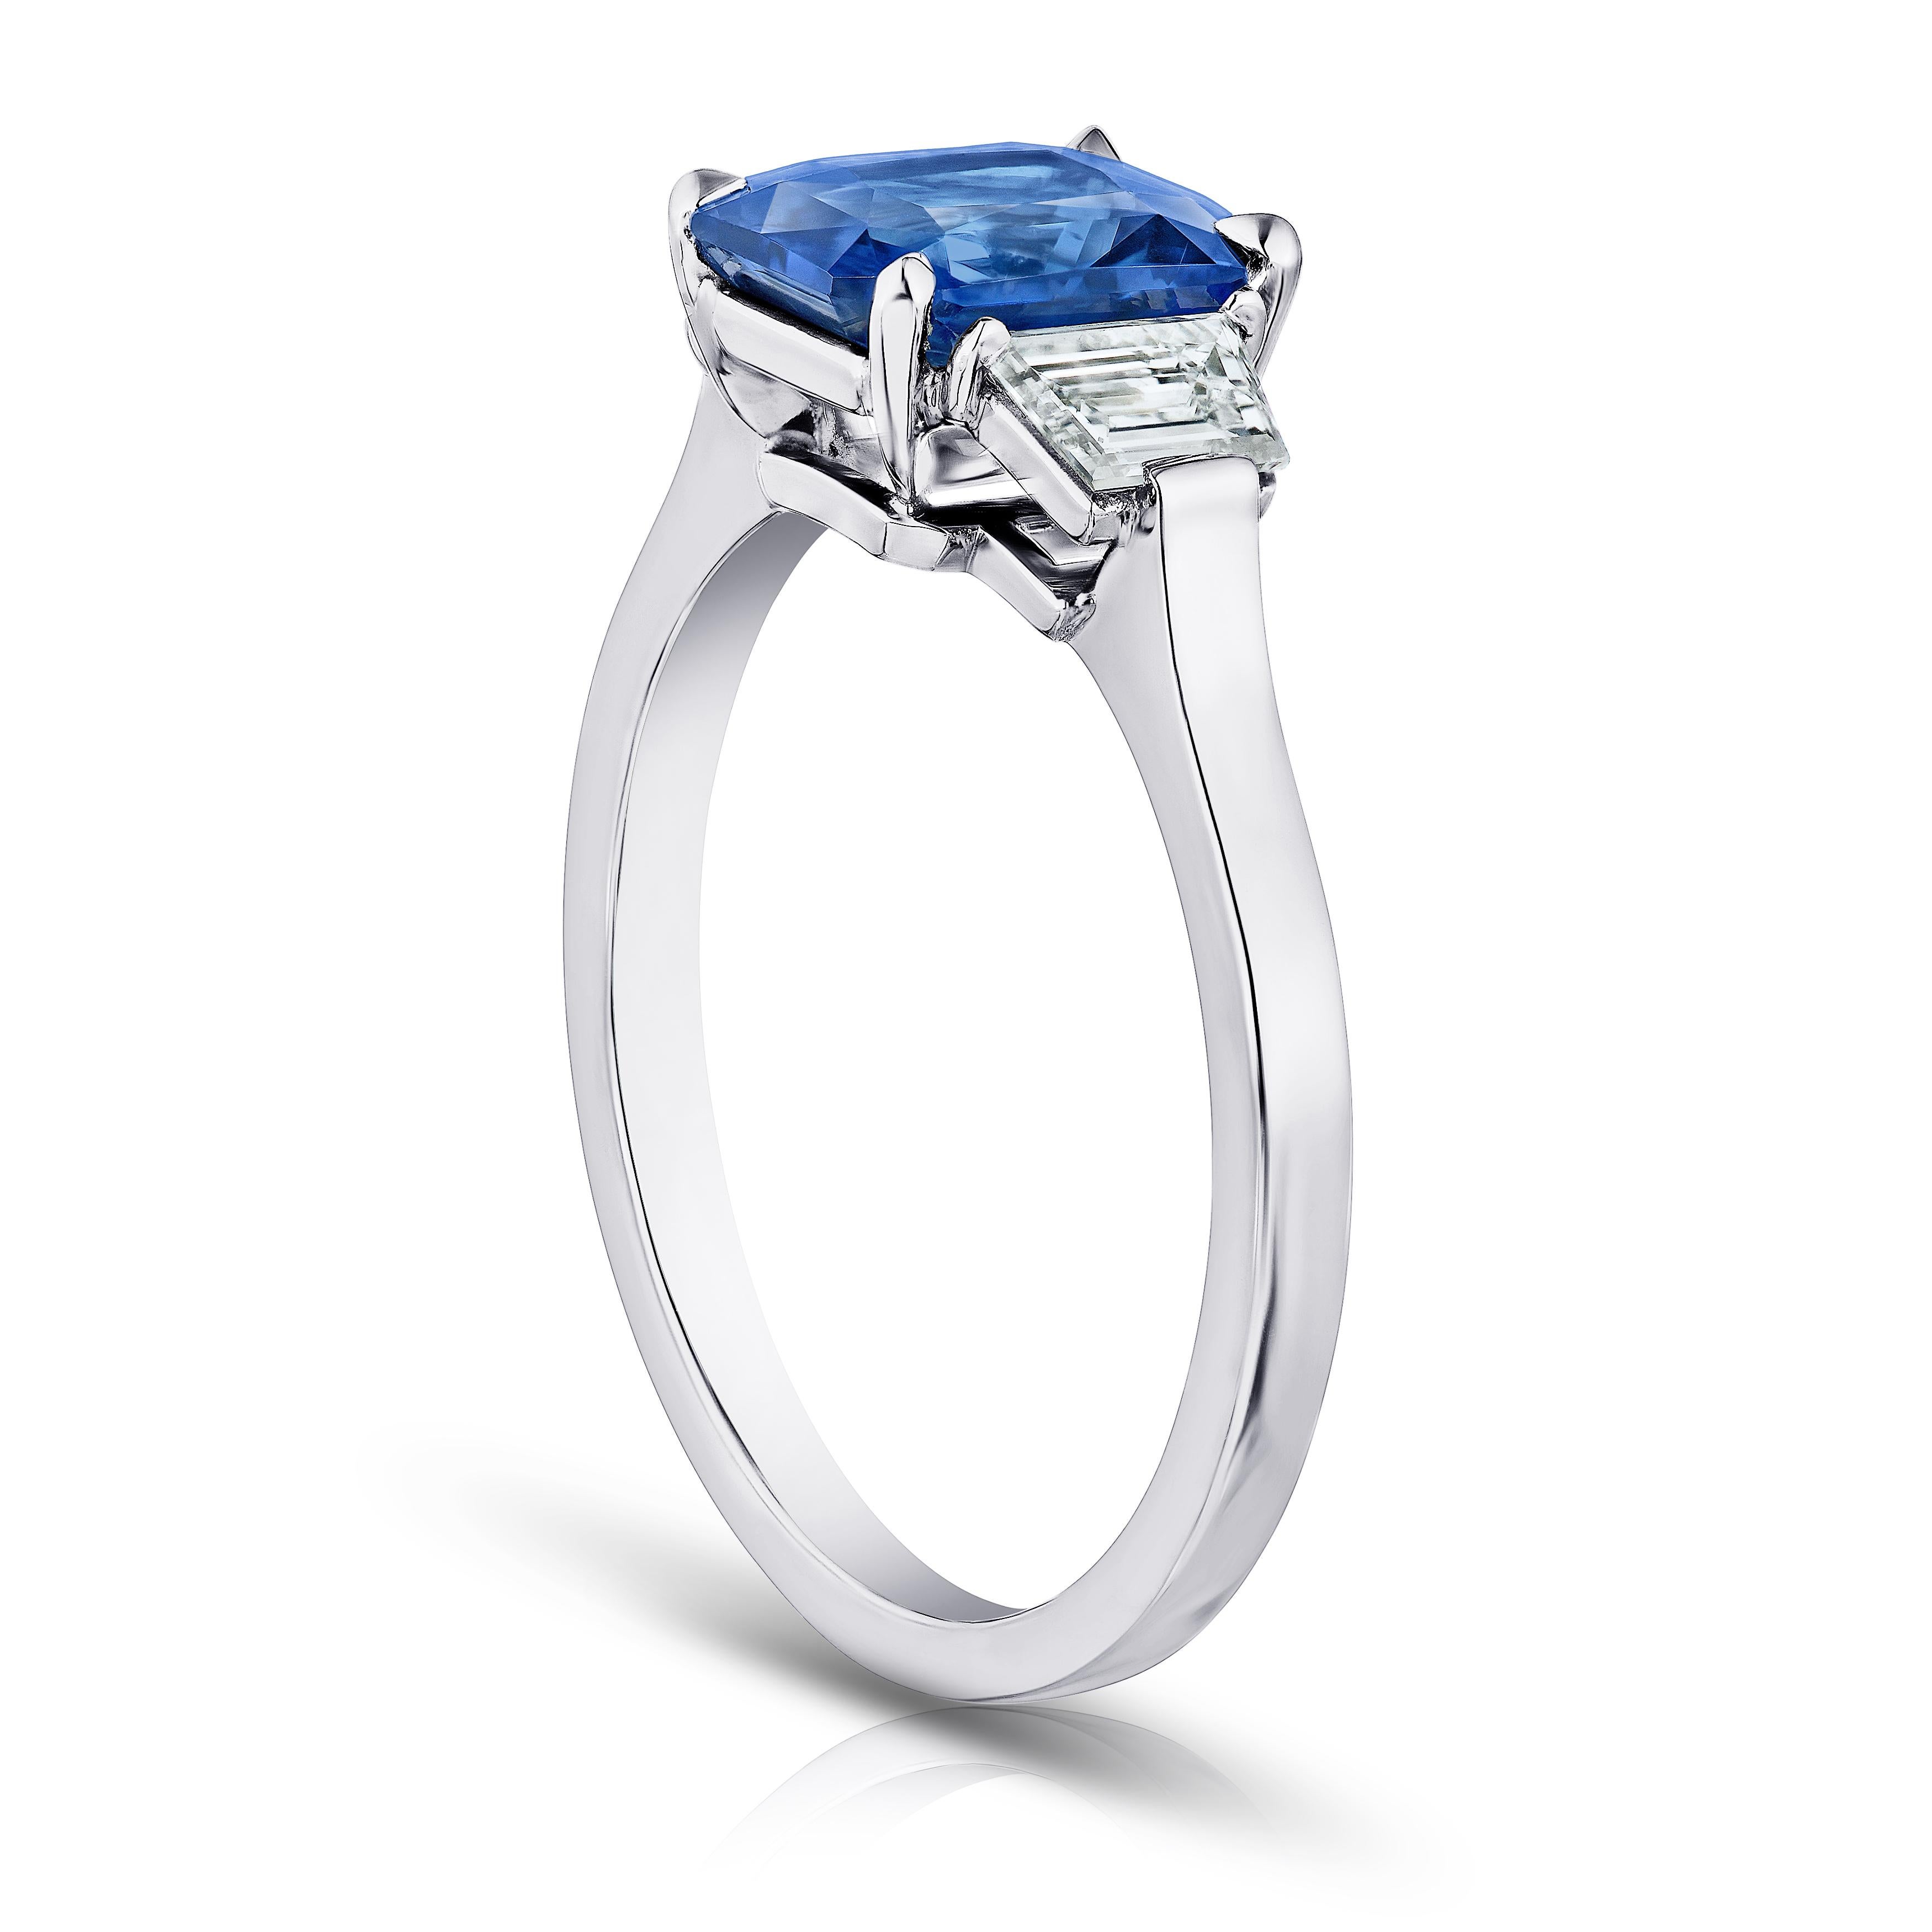 2.13 carat radiant cut blue sapphire with trapezoid step cut diamonds .47 carats set in a platinum ring. This ring is currently a size 7.  We will resize to your finger size without charge.
